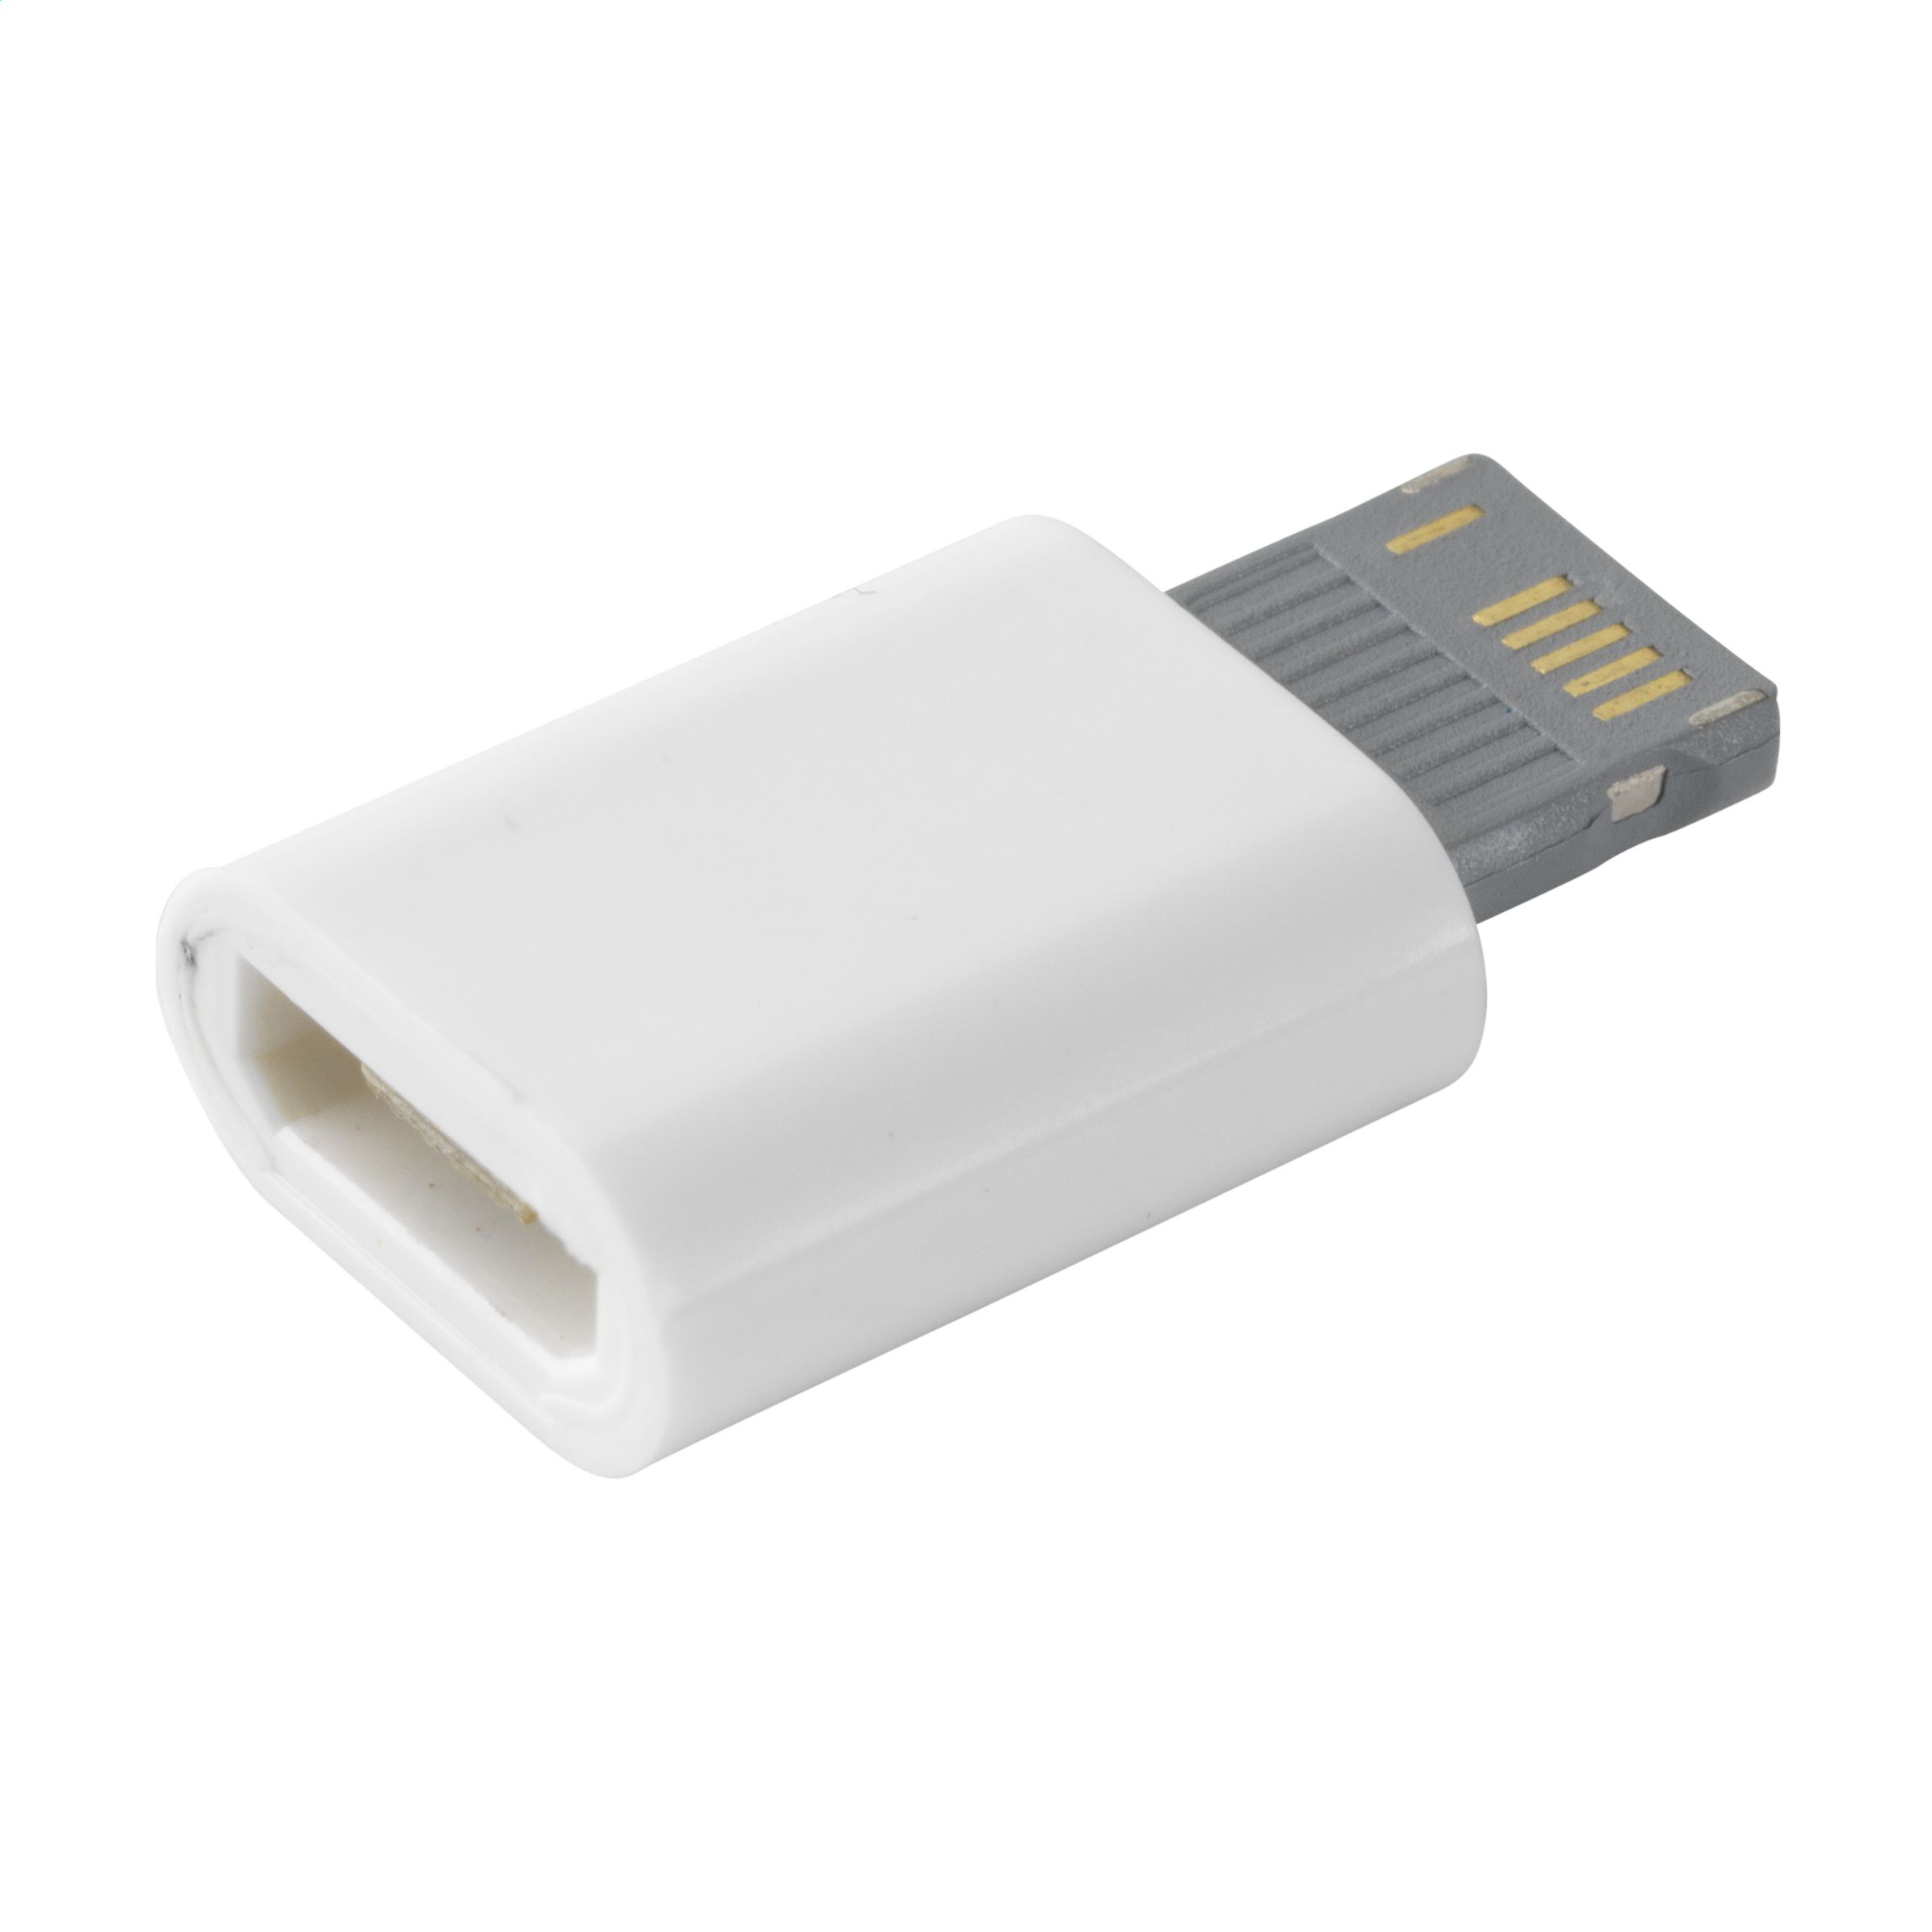 Connettore Micro-USB a Lightning - Sant'Eufemia d'Aspromonte